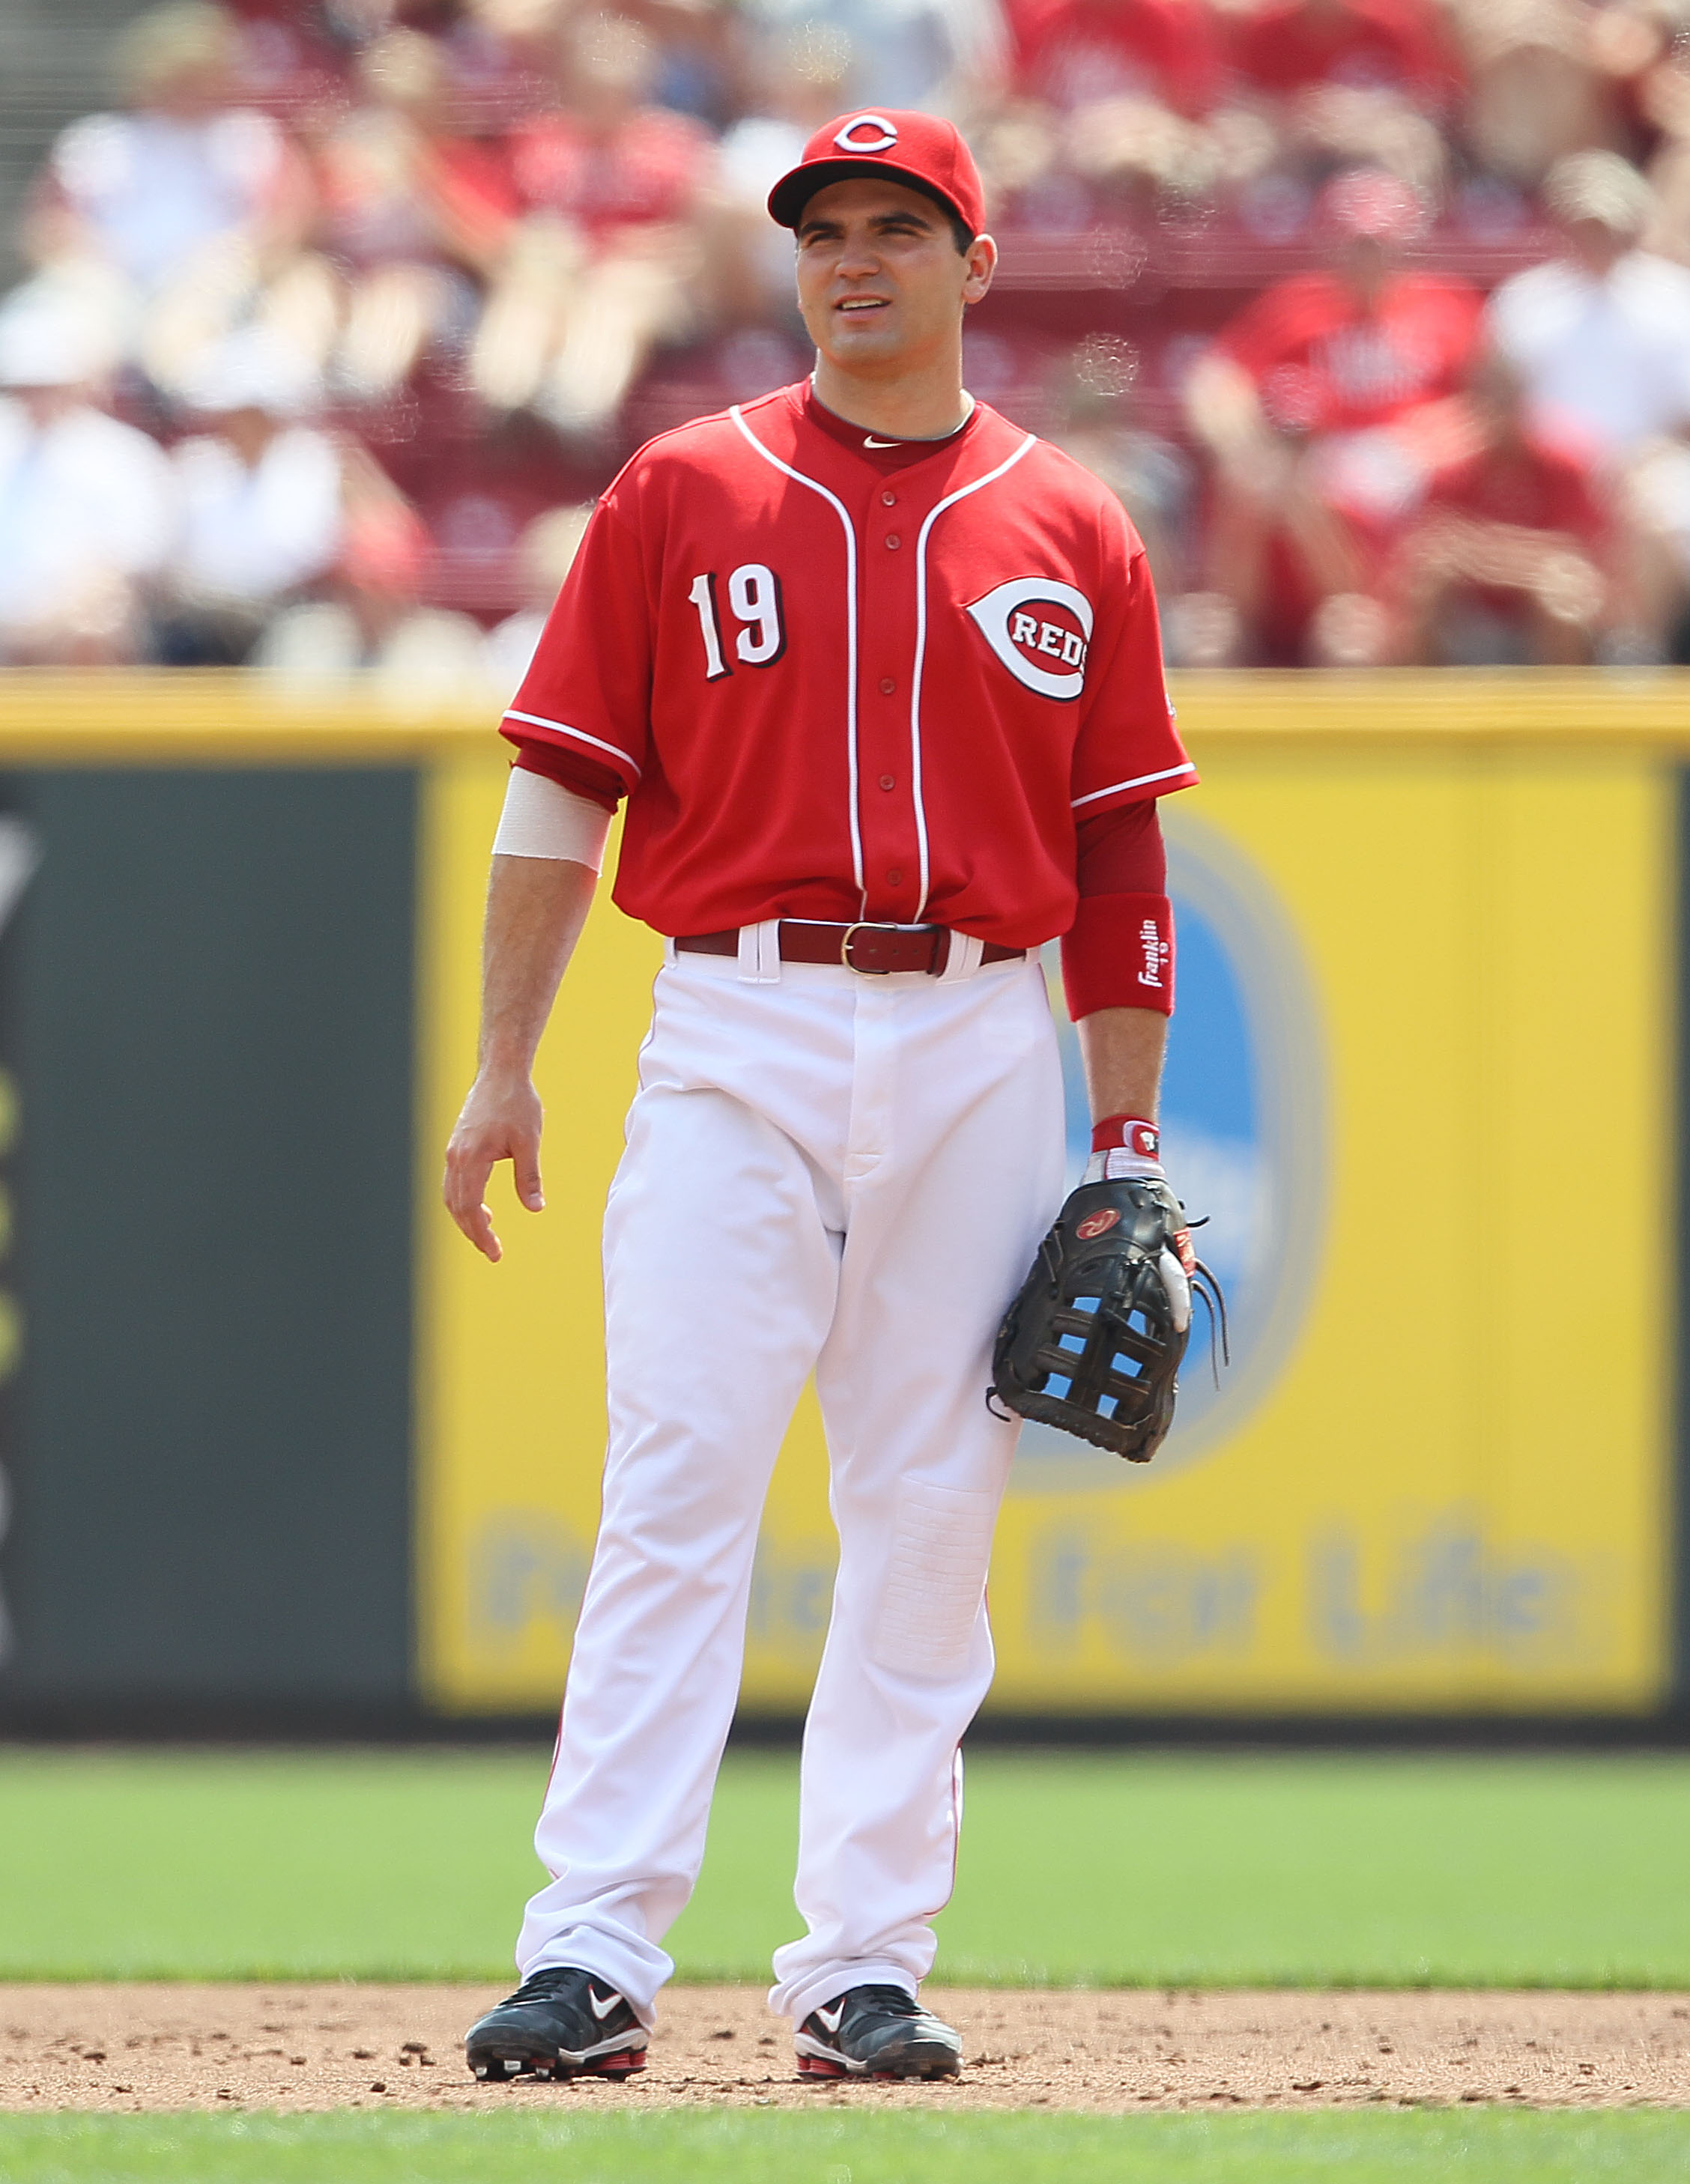 CINCINNATI - AUGUST 29:  Joey Votto #19 of the Cincinnati Reds is pictured during the game against the Chicago Cubs at Great American Ball Park on August 29, 2010 in Cincinnati, Ohio.  (Photo by Andy Lyons/Getty Images)